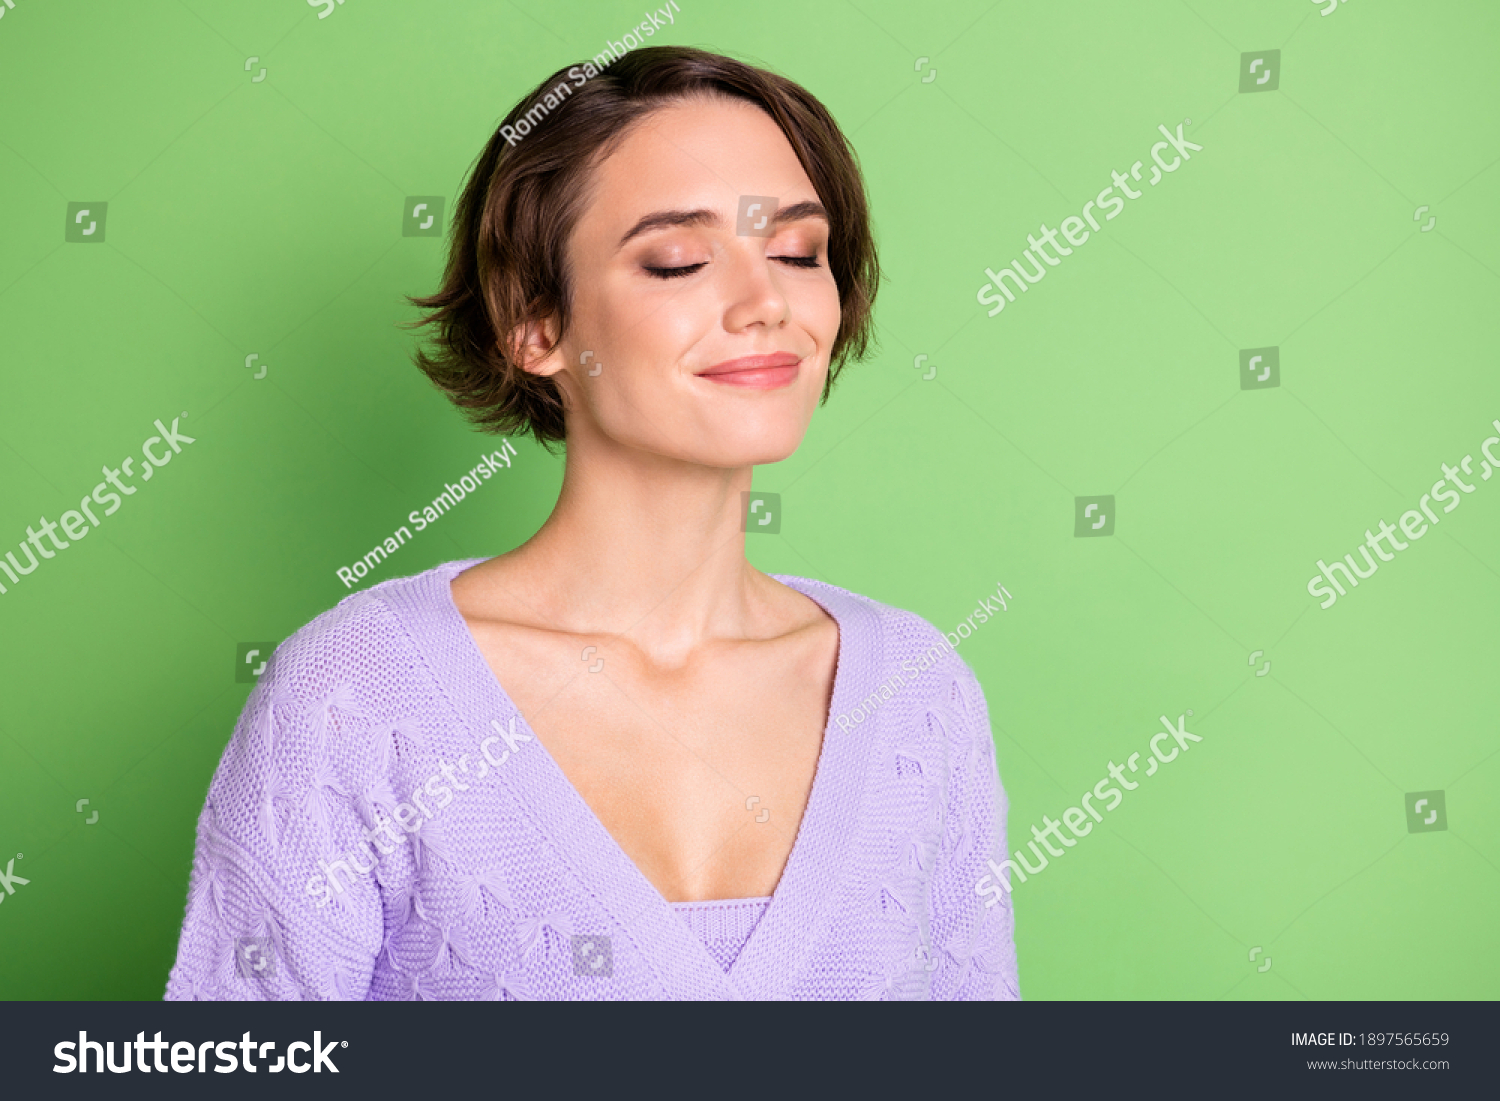 Portrait of adorable young girl closed eyes smile enjoying smell wear purple clothing isolated on green color background #1897565659